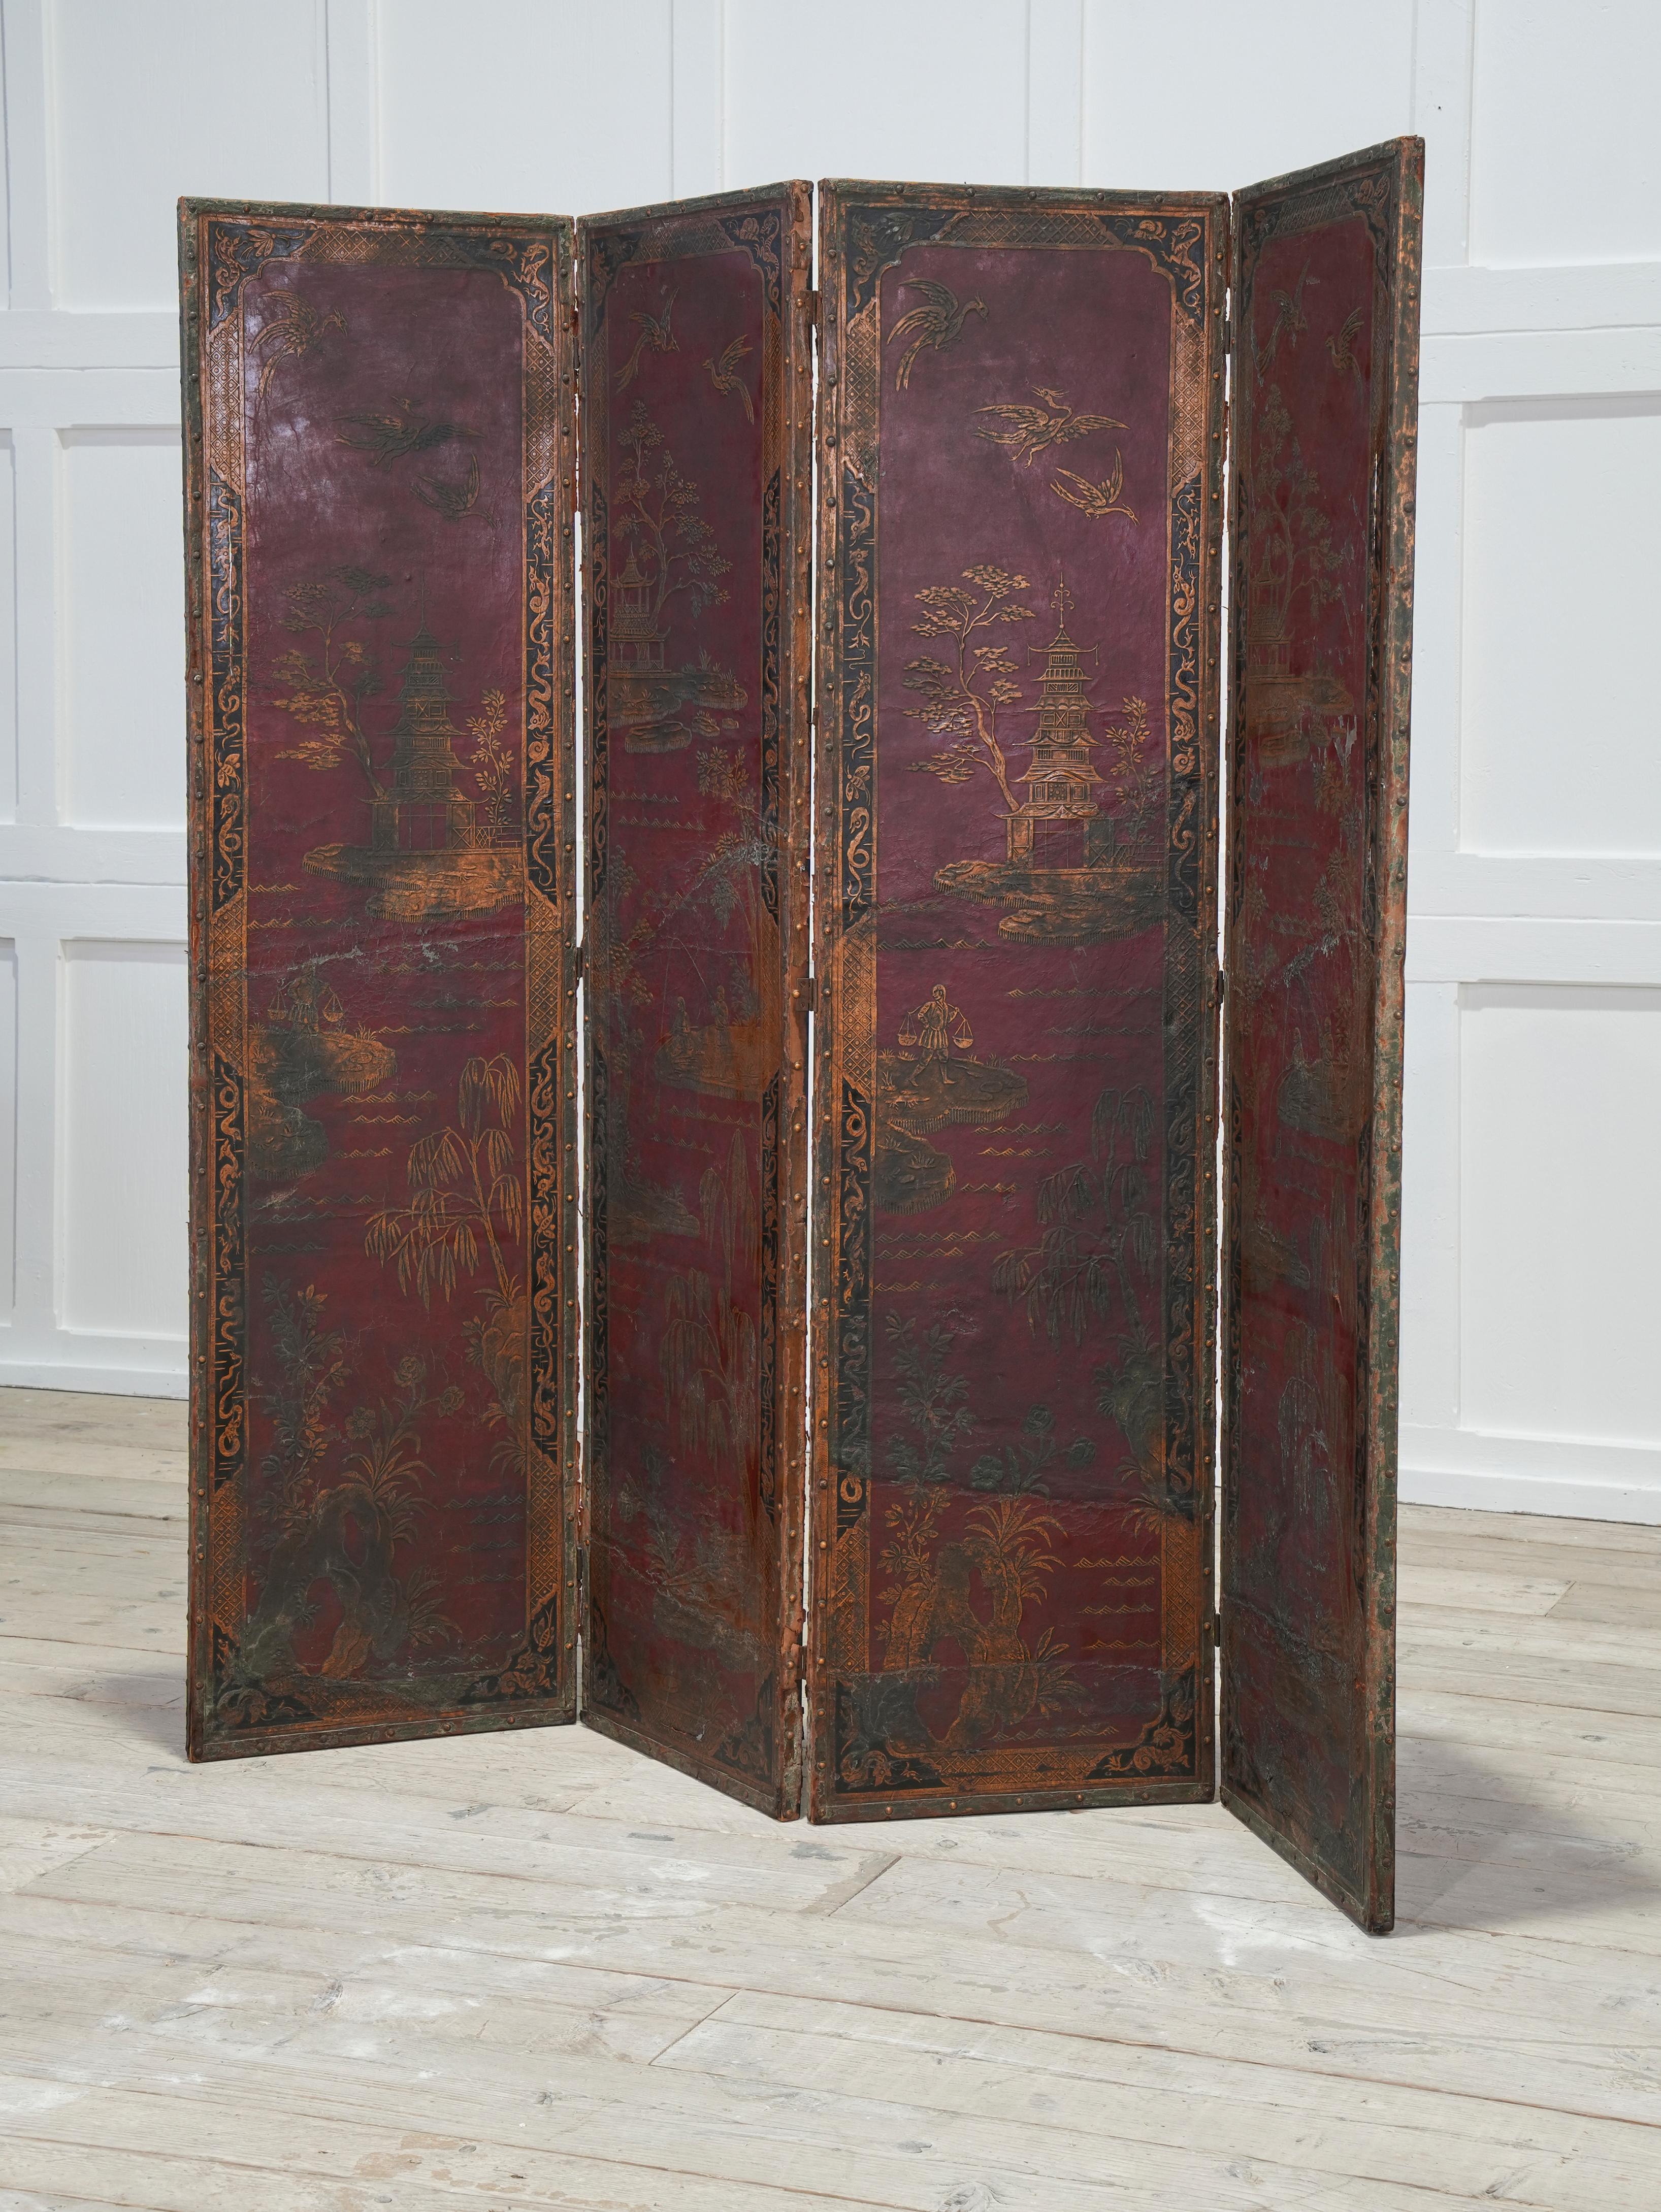 A fourfold impressed leather painted and gilt room screen
English, second half of the 19th century.
H: 183 W: 180 (each panel 45 cm) W: 2.5 CM.
H: 72 W: 70.8 (each panel 17.7 inches) W: 1 INCHES.